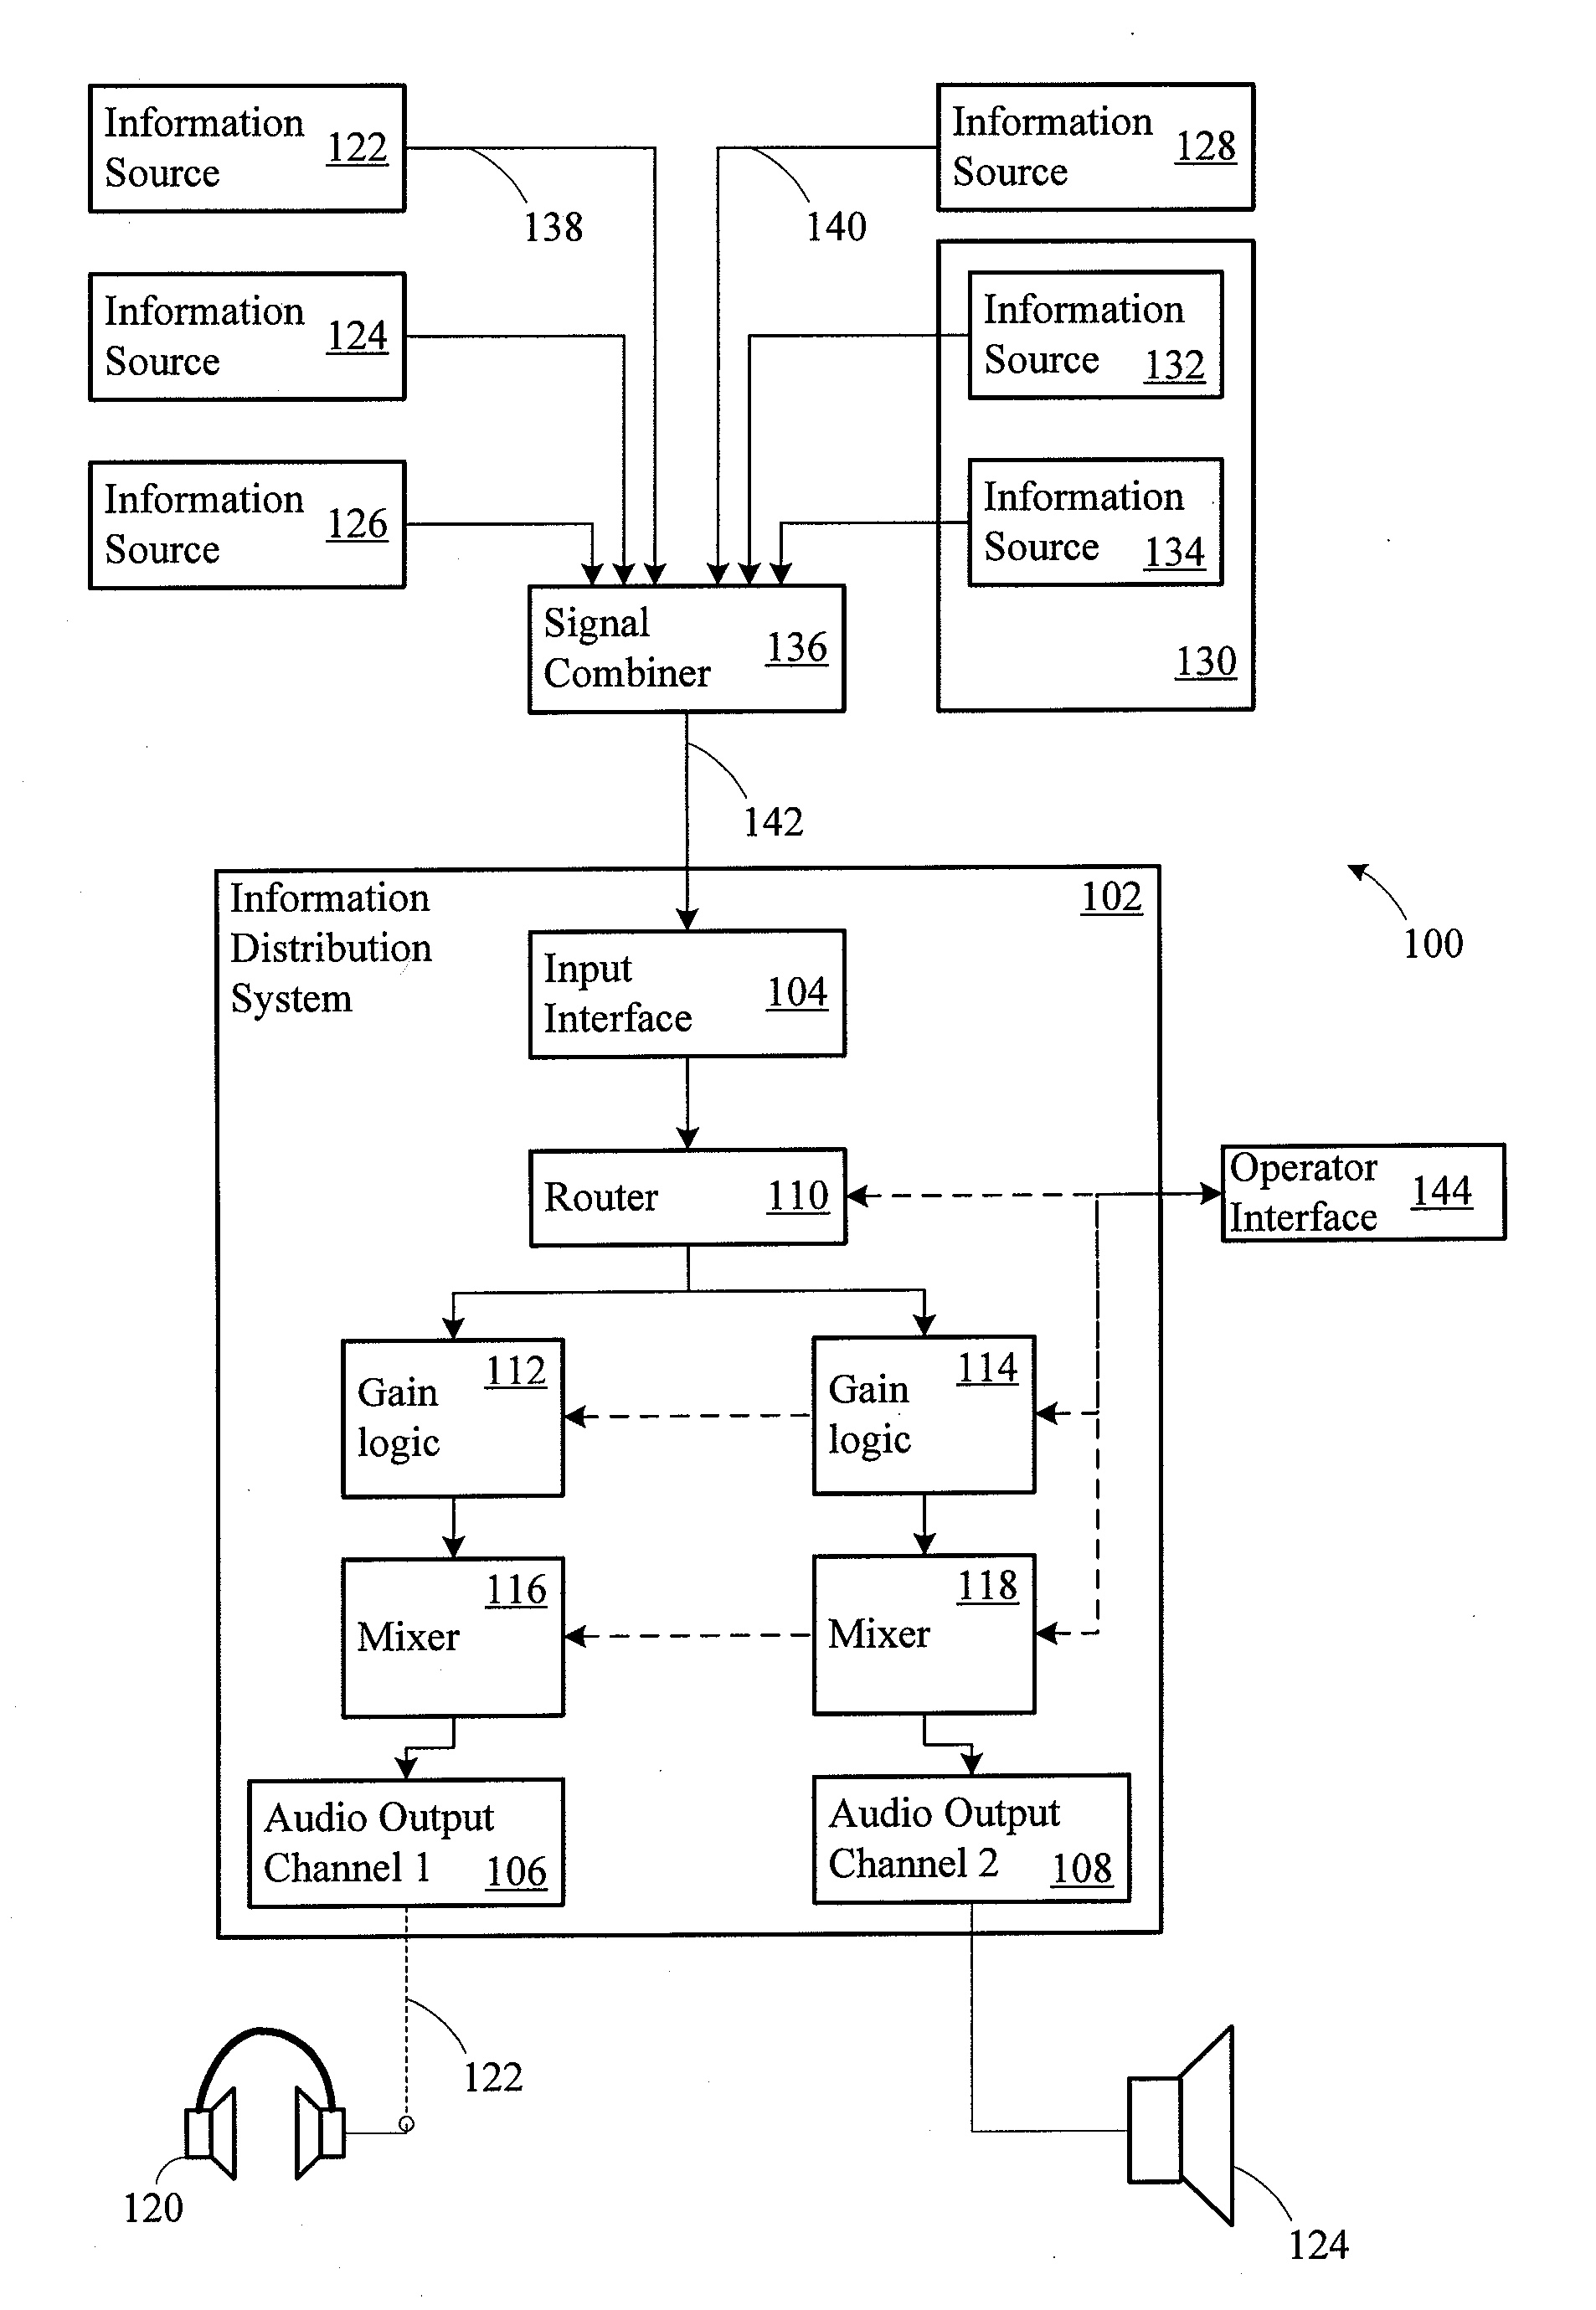 Configurable information distribution system for a vehicle